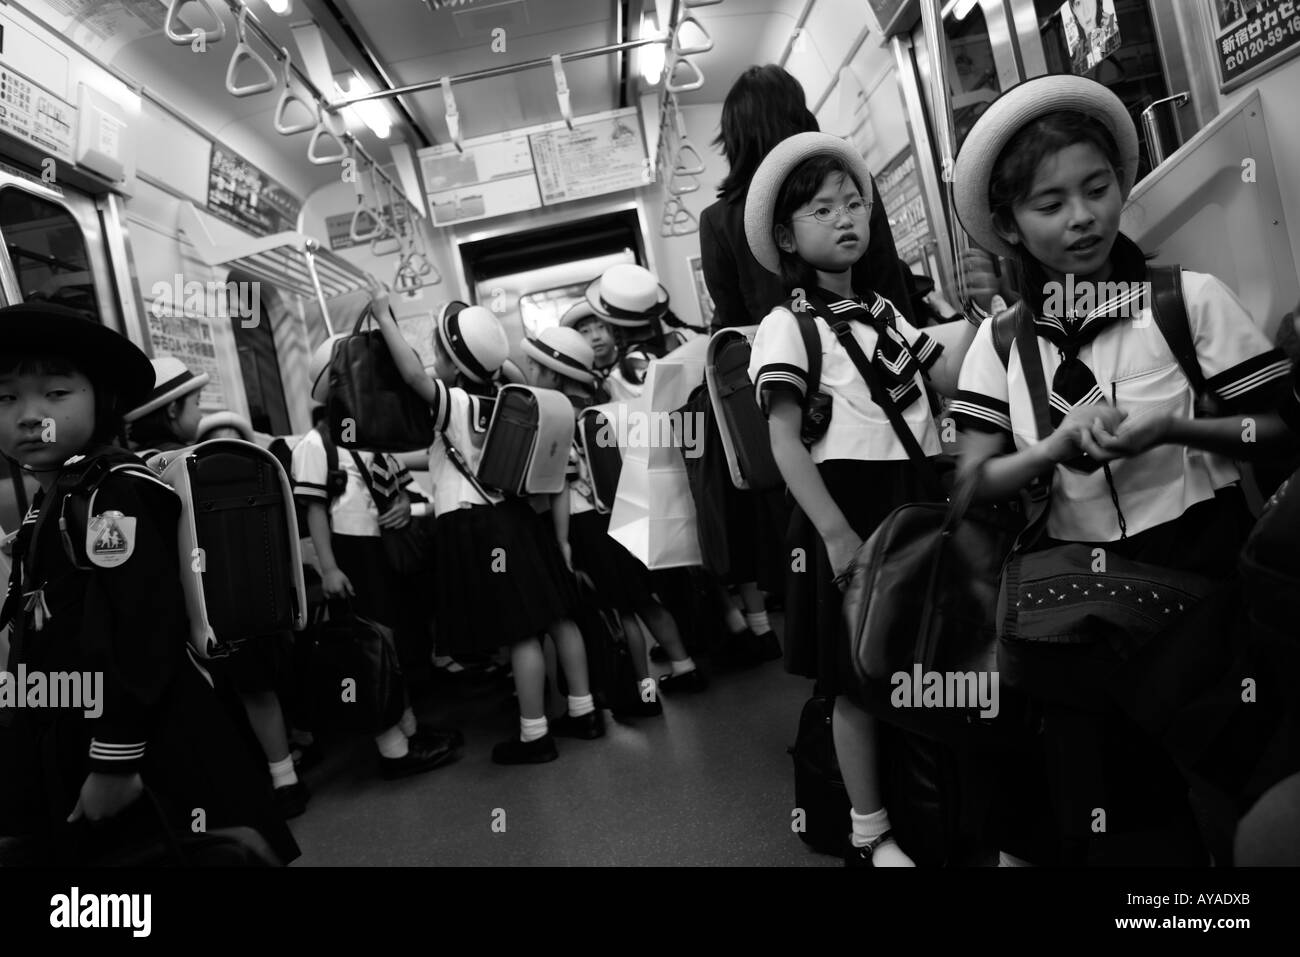 Asia Tokyo Japan Young school girl in uniform on subway train Stock Photo